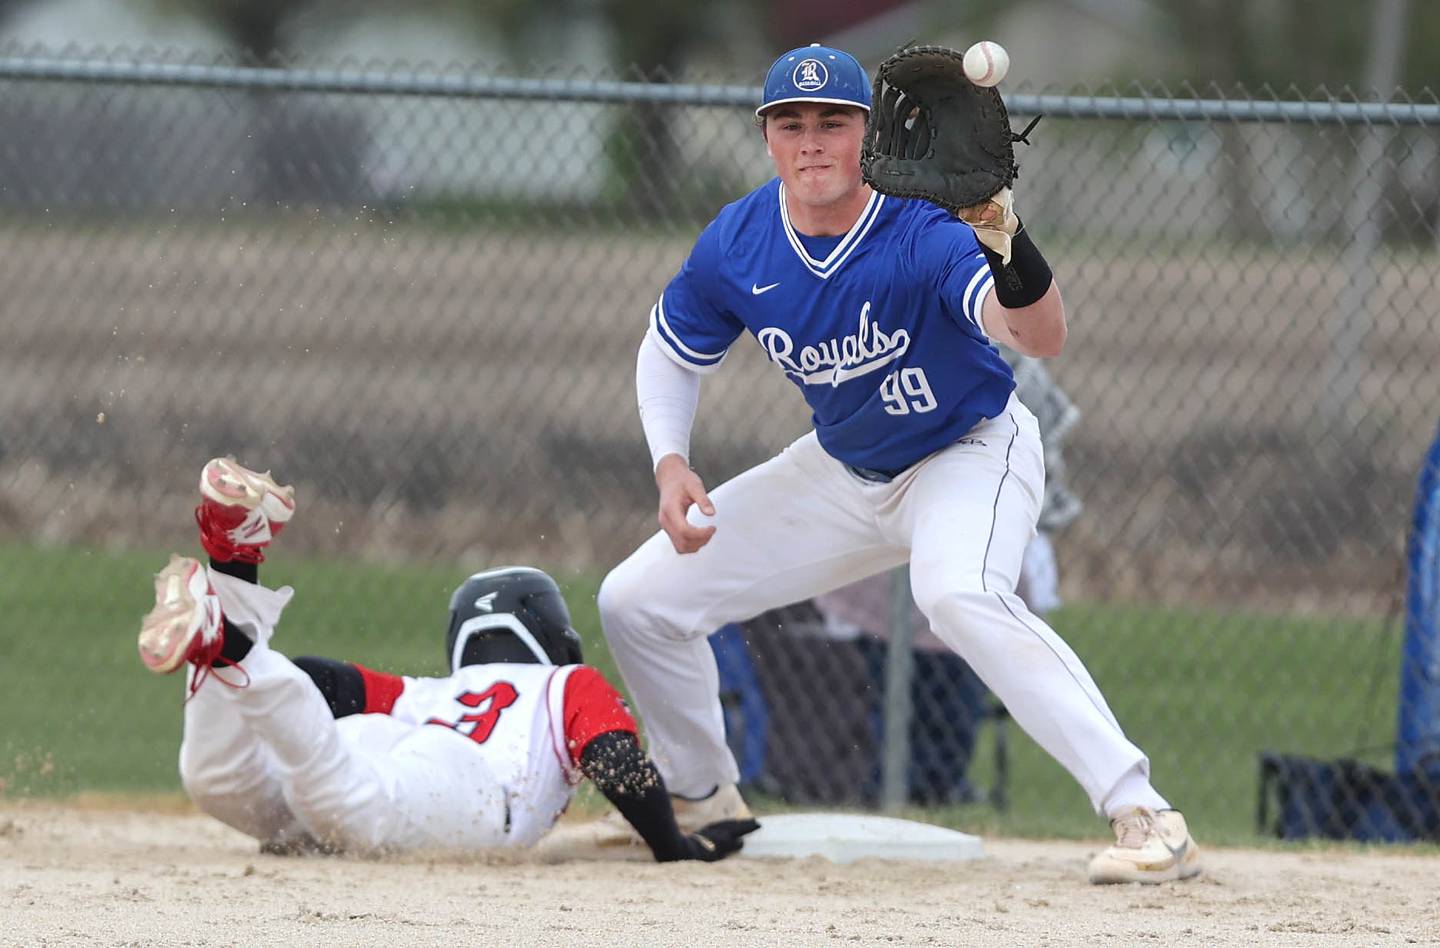 Indian Creek's Tyler Bogle dives back safely on a pickoff attempt as Hinckley-Big Rock's Martin Ledbetter takes the throw during their game Monday, May 1, 2023, at Indian Creek High School in Shabbona.